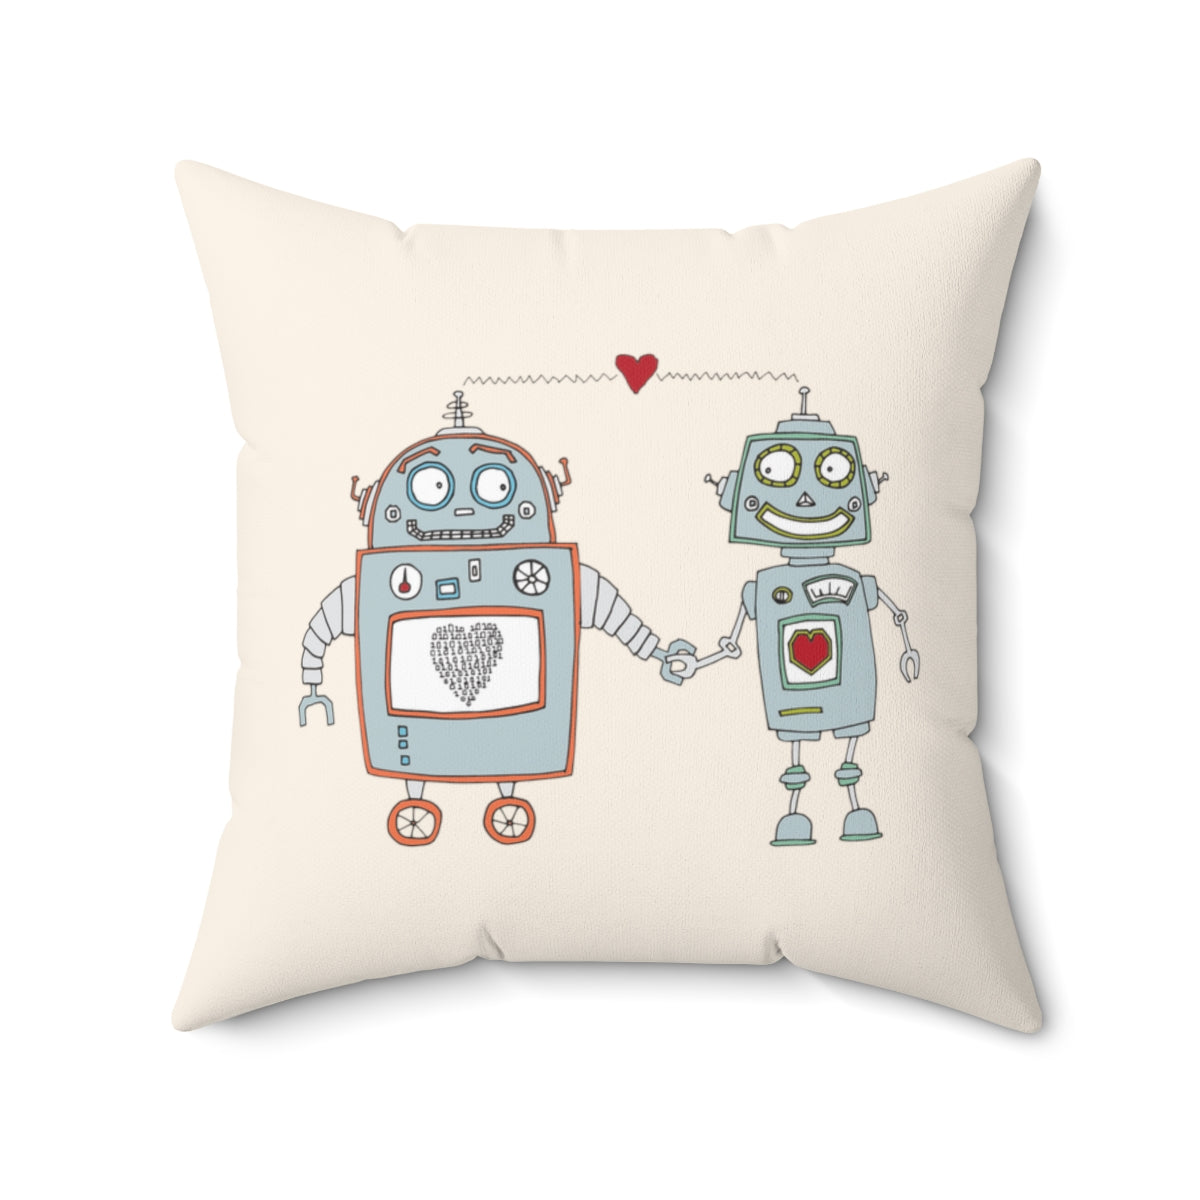 Robots in Love | Cute & Nerdy Throw Pillow | 4 sizes